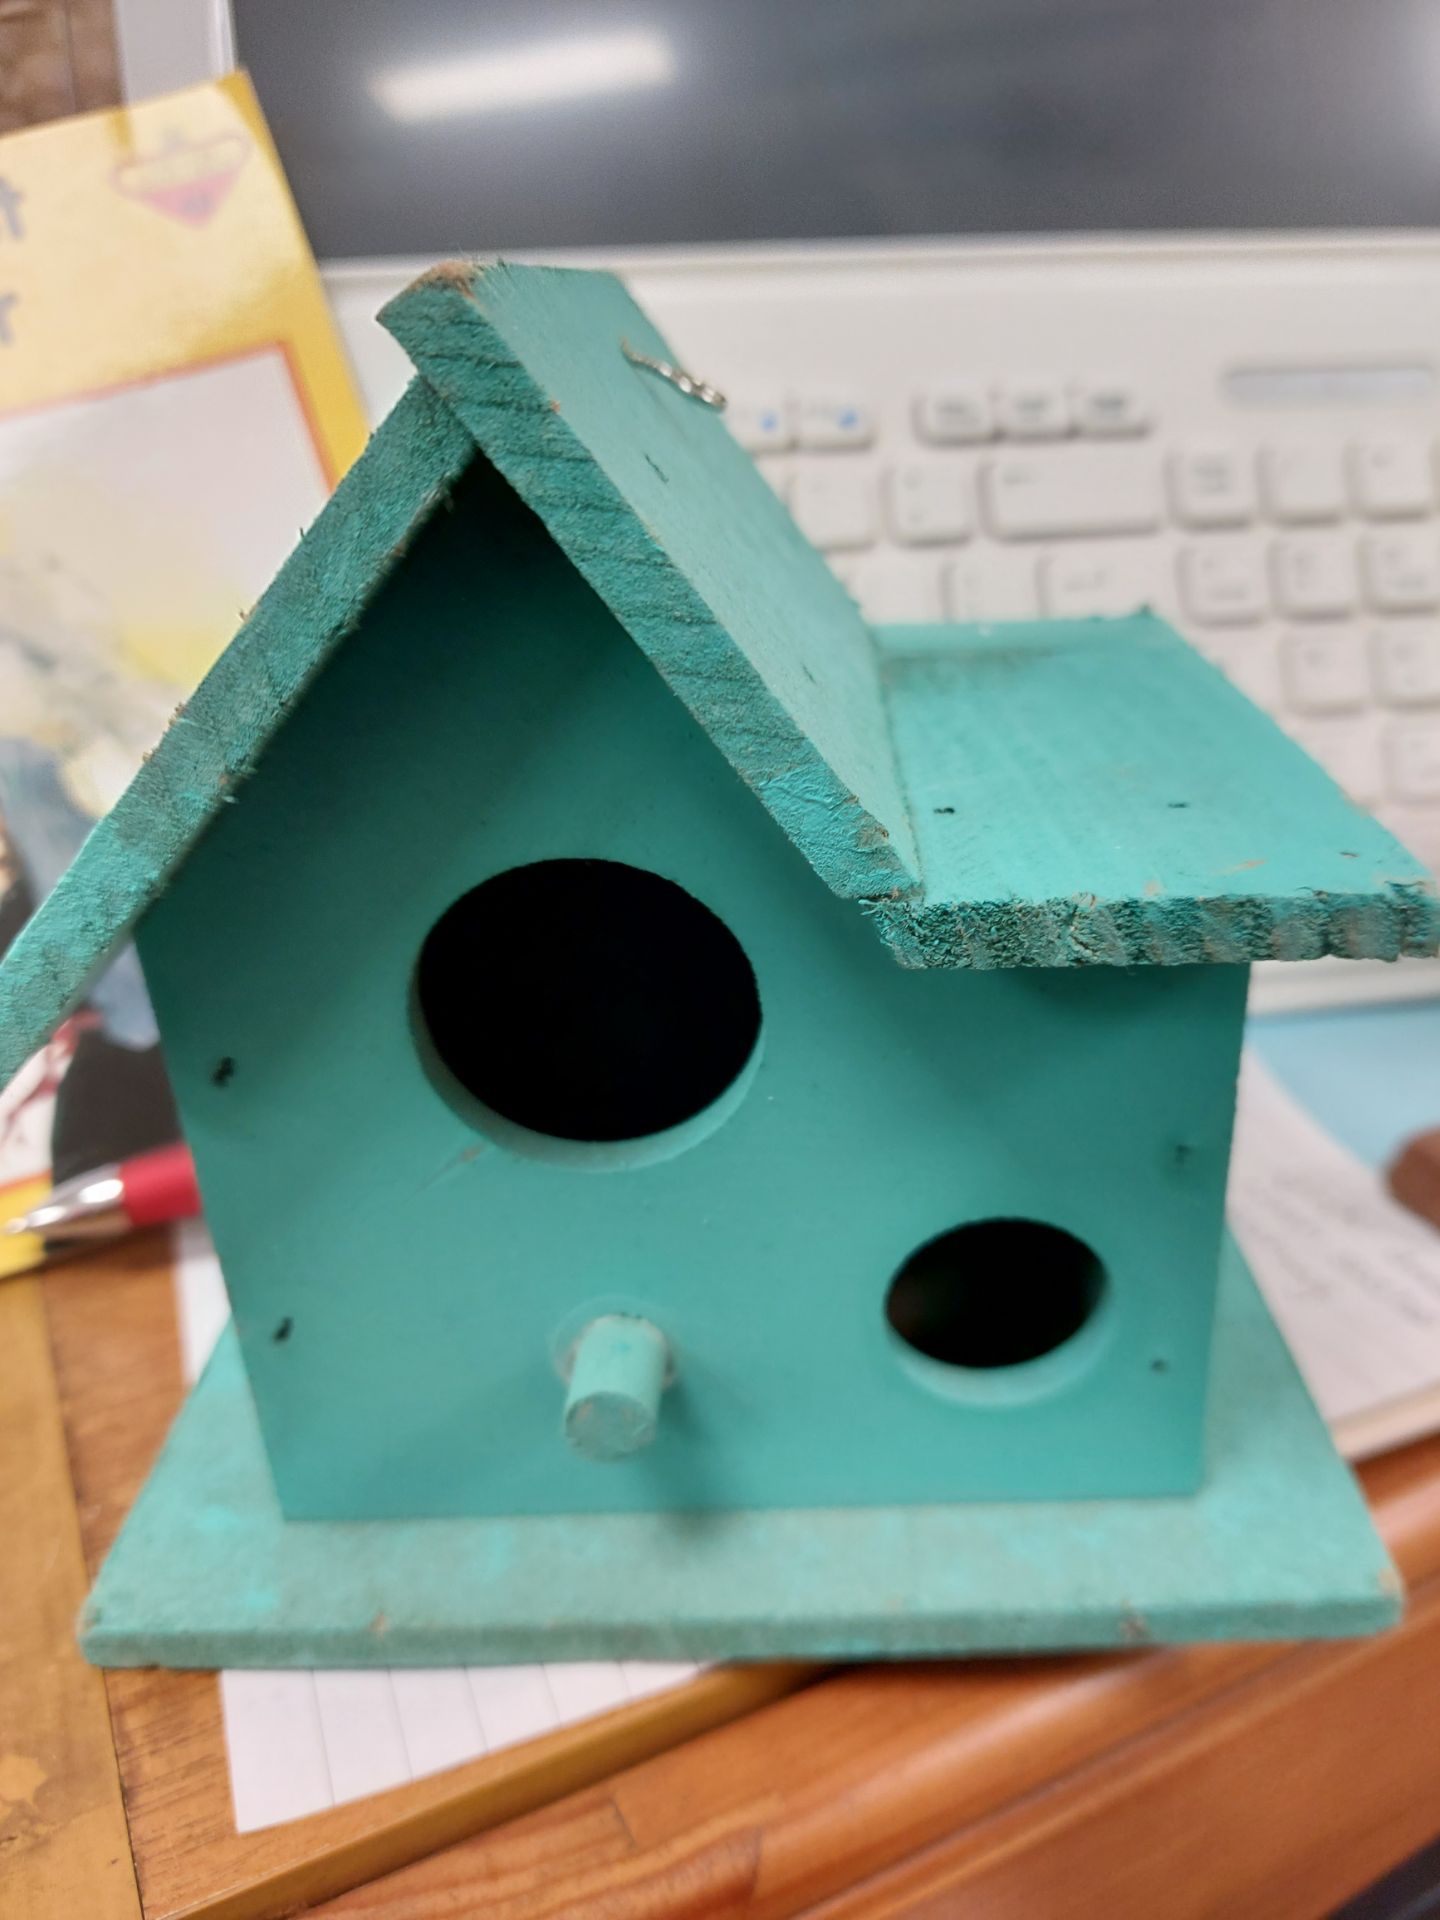 Bird Boxes, Small Charlie Dimmock x 4